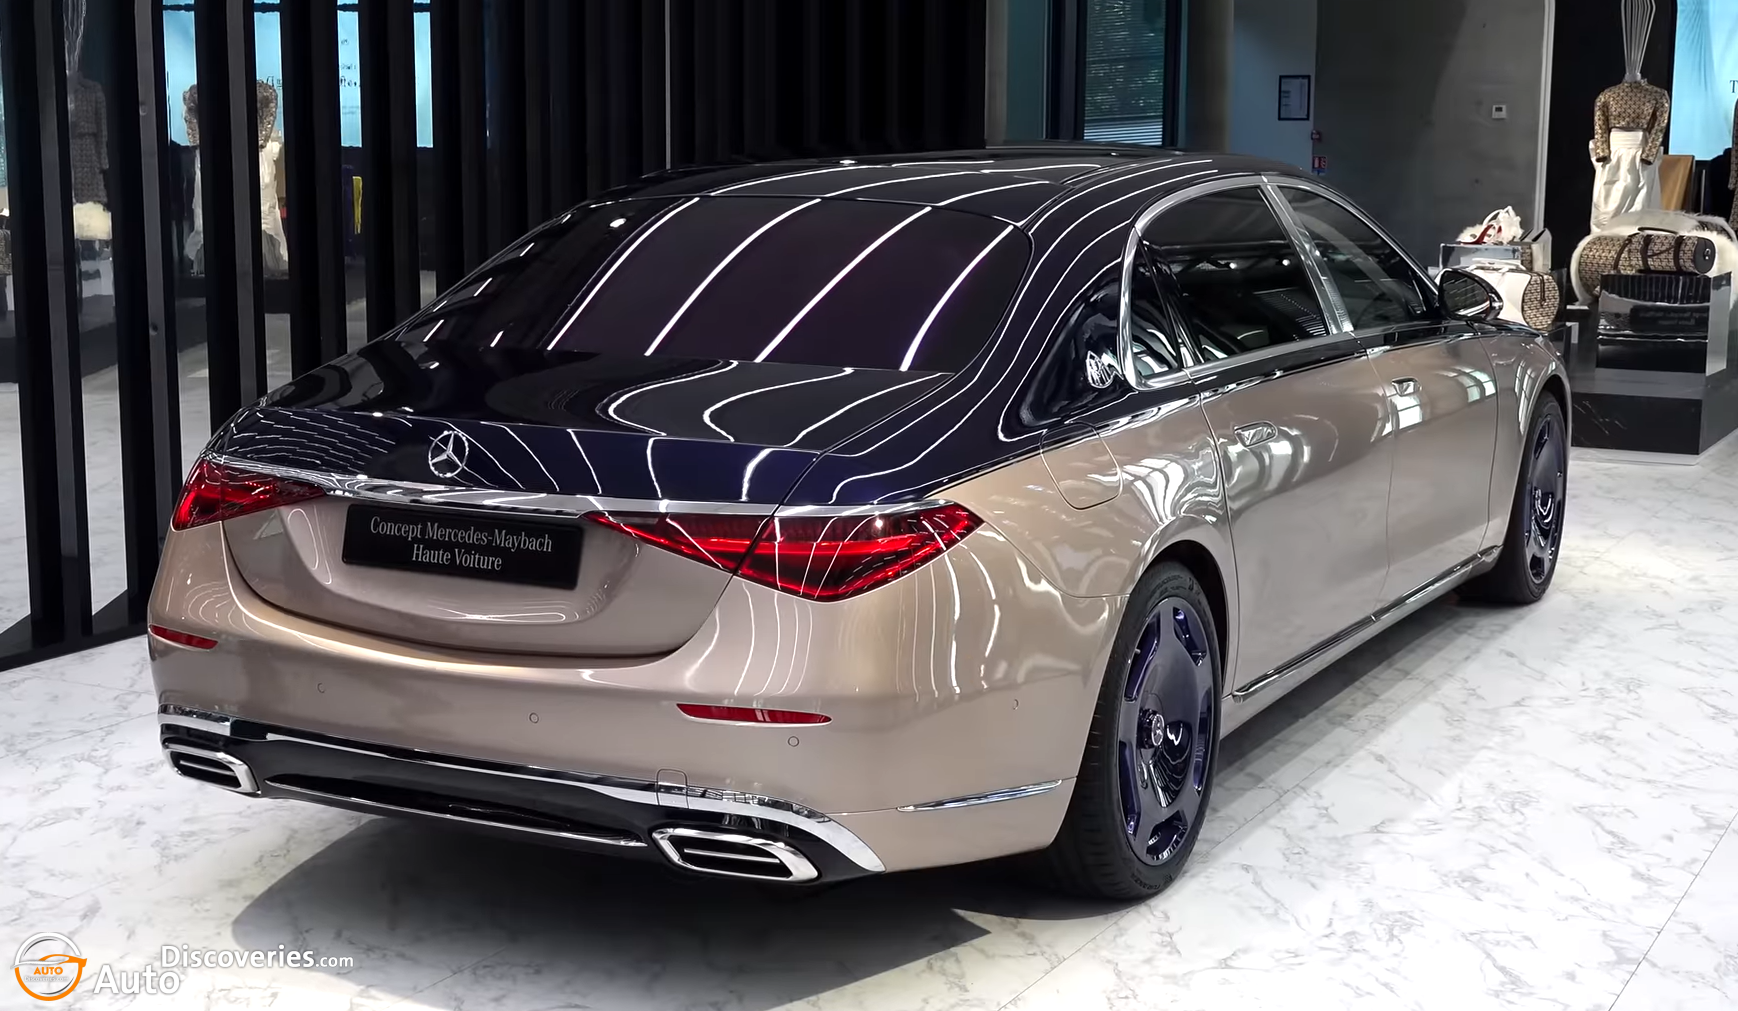 NEW 2023 Mercedes MAYBACH S Class V12 - Auto Discoveries